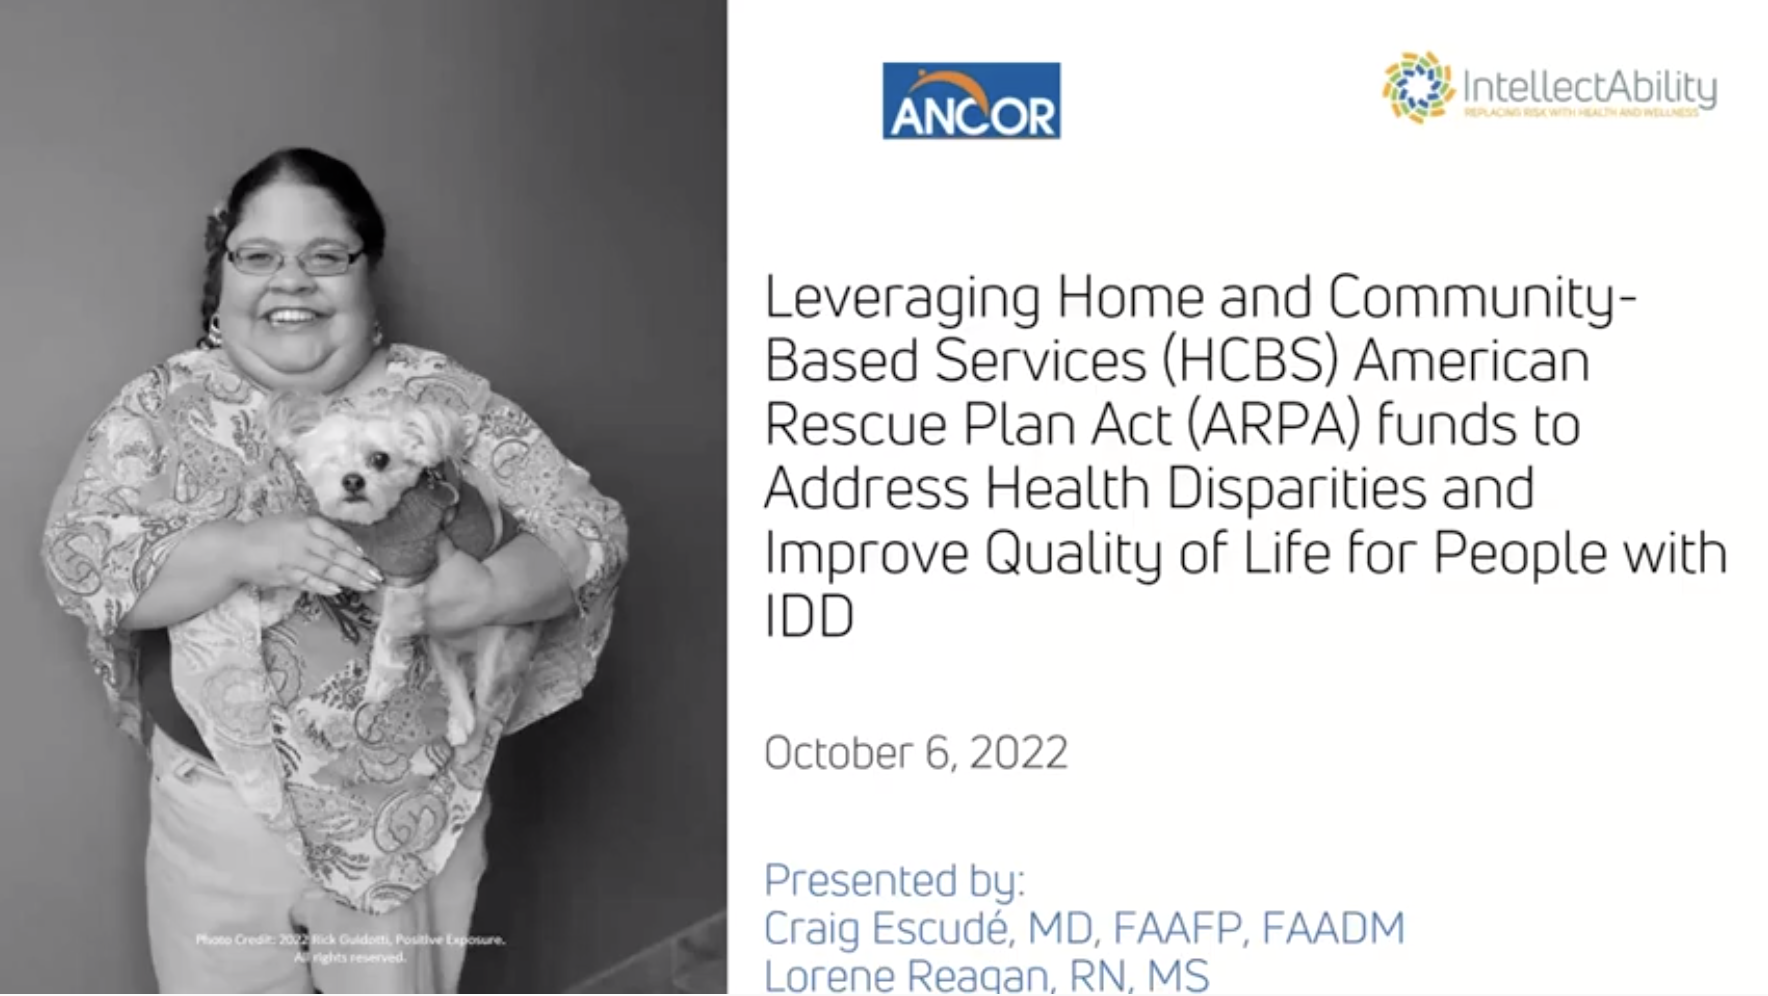 Leveraging HCBS American Rescue Plan Act funds to Address Health Disparities for People with IDD